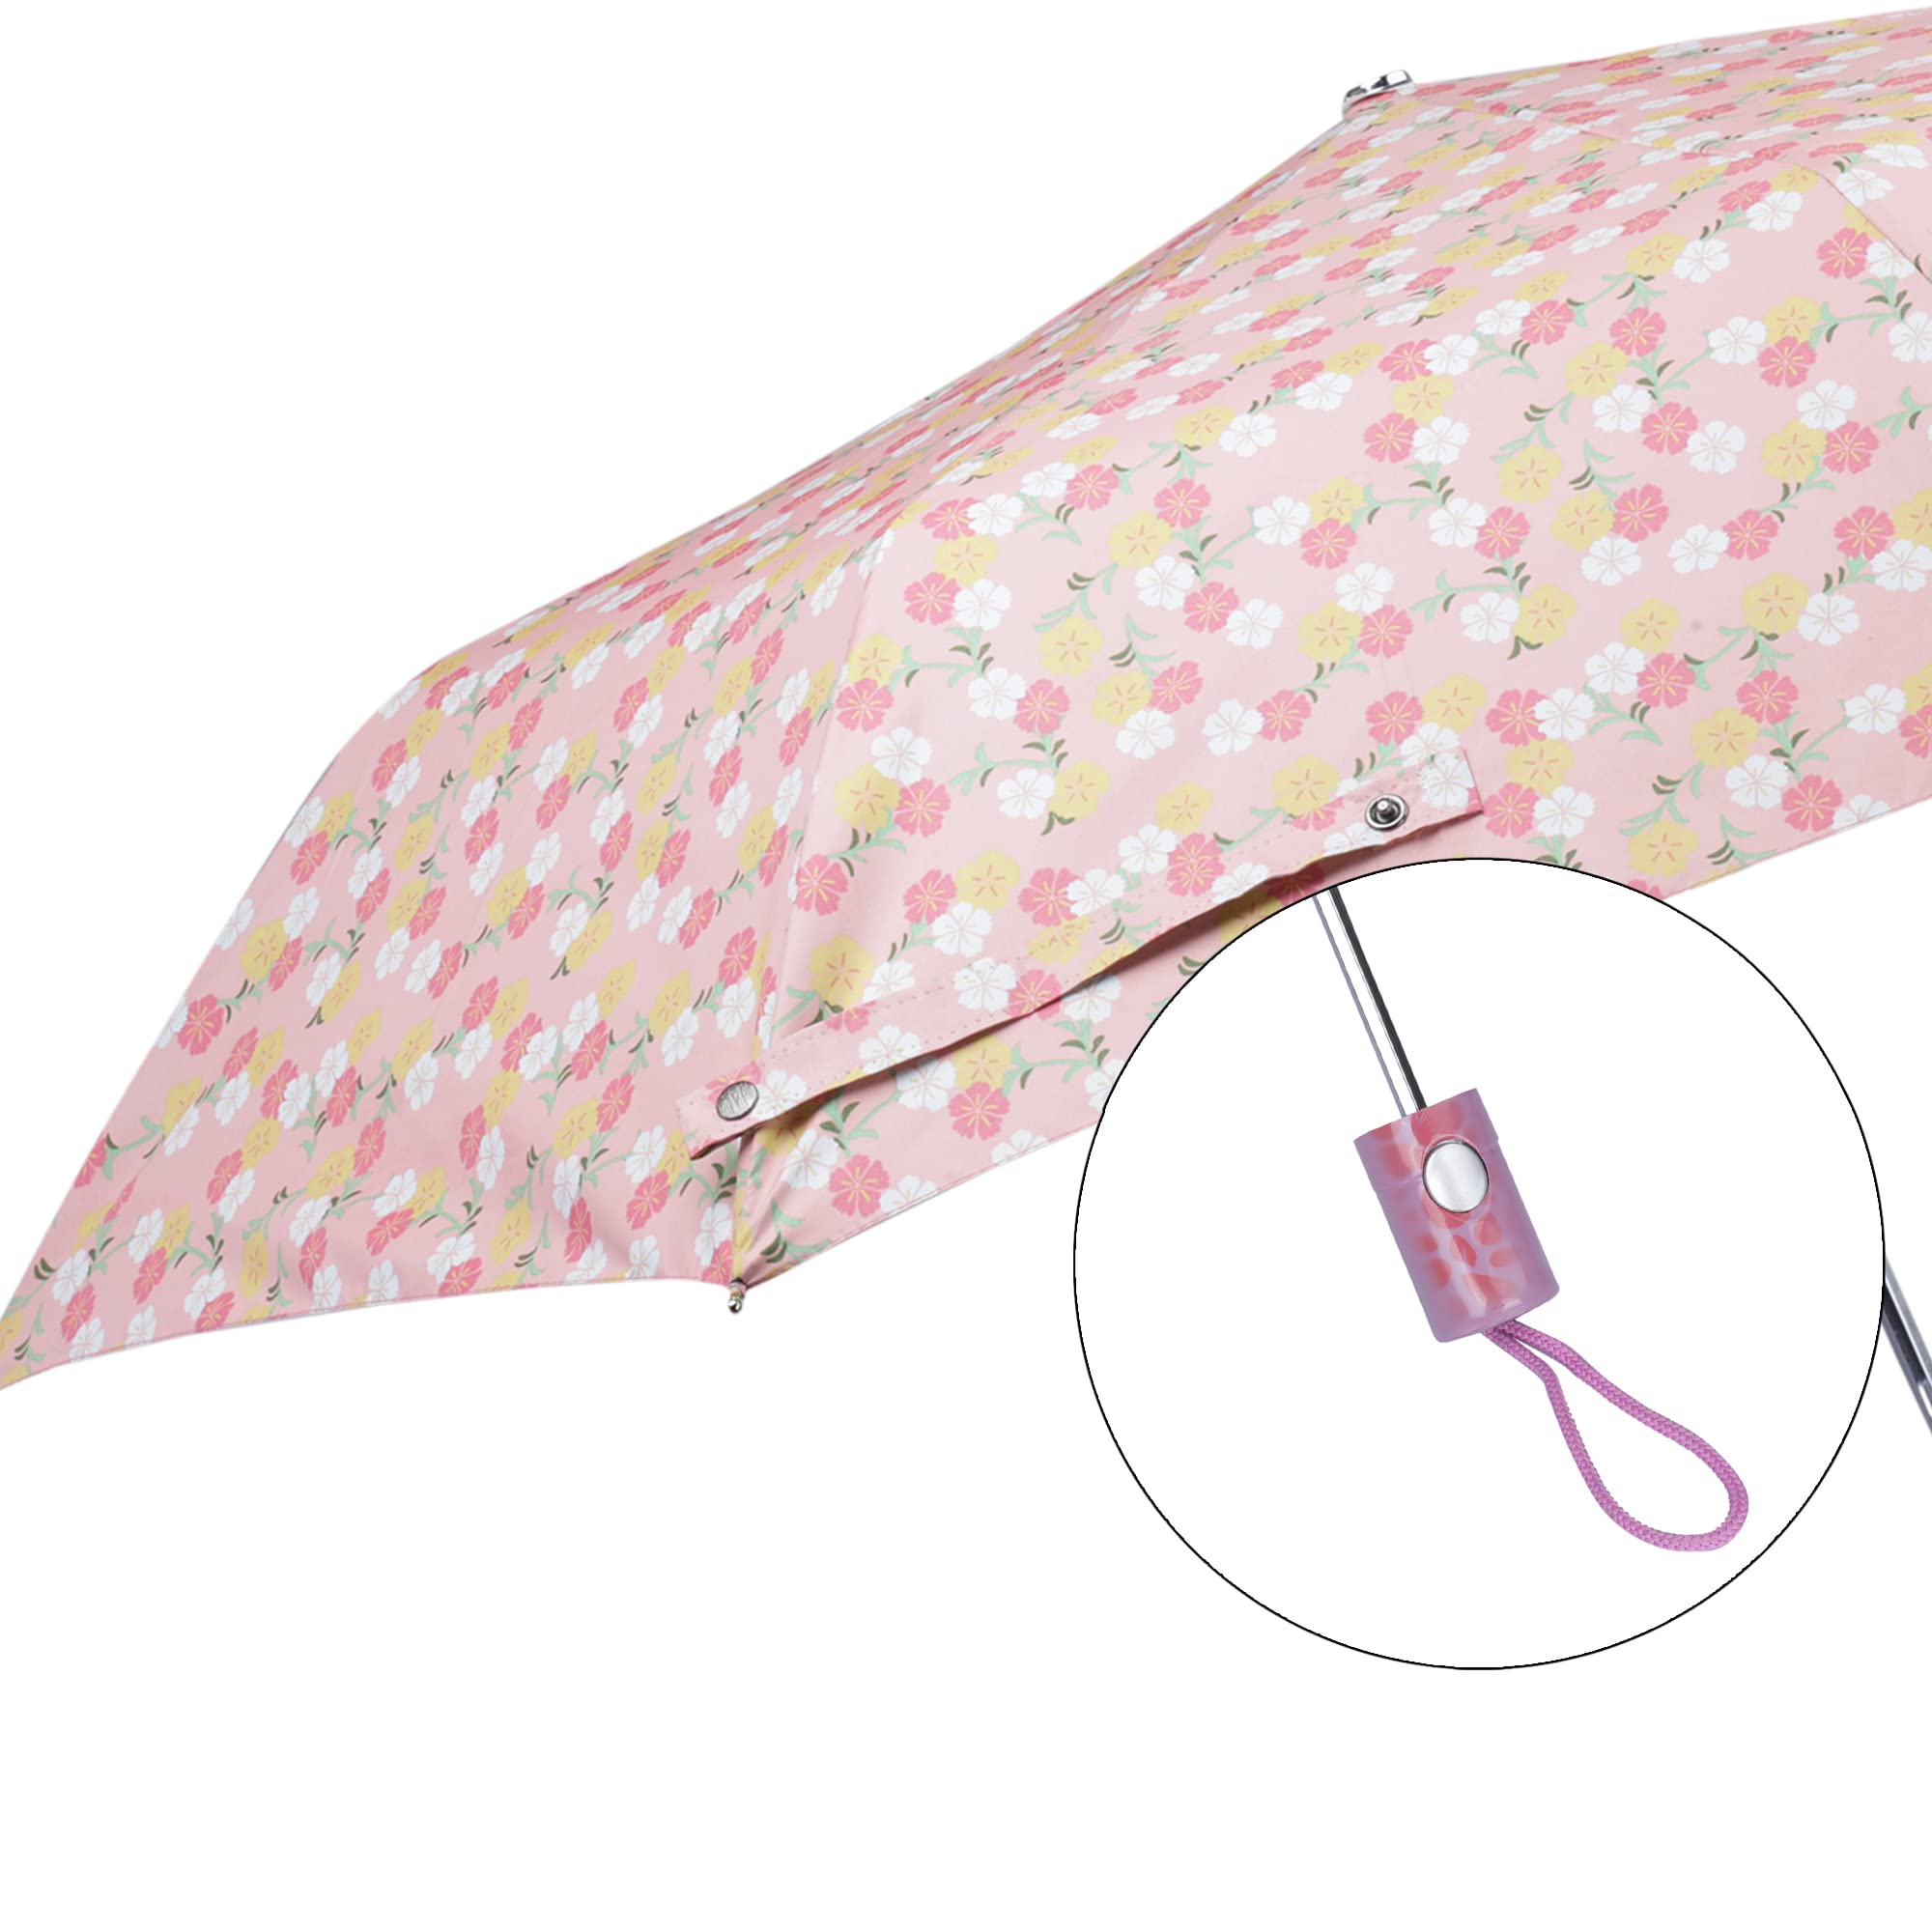 THE CLOWNFISH Umbrella Splash Series 3 Fold Auto Open Waterproof Water Repellent 190 T Immitation Nylon Double Coated Silver Lined Umbrellas For Men and Women (Baby Pink)